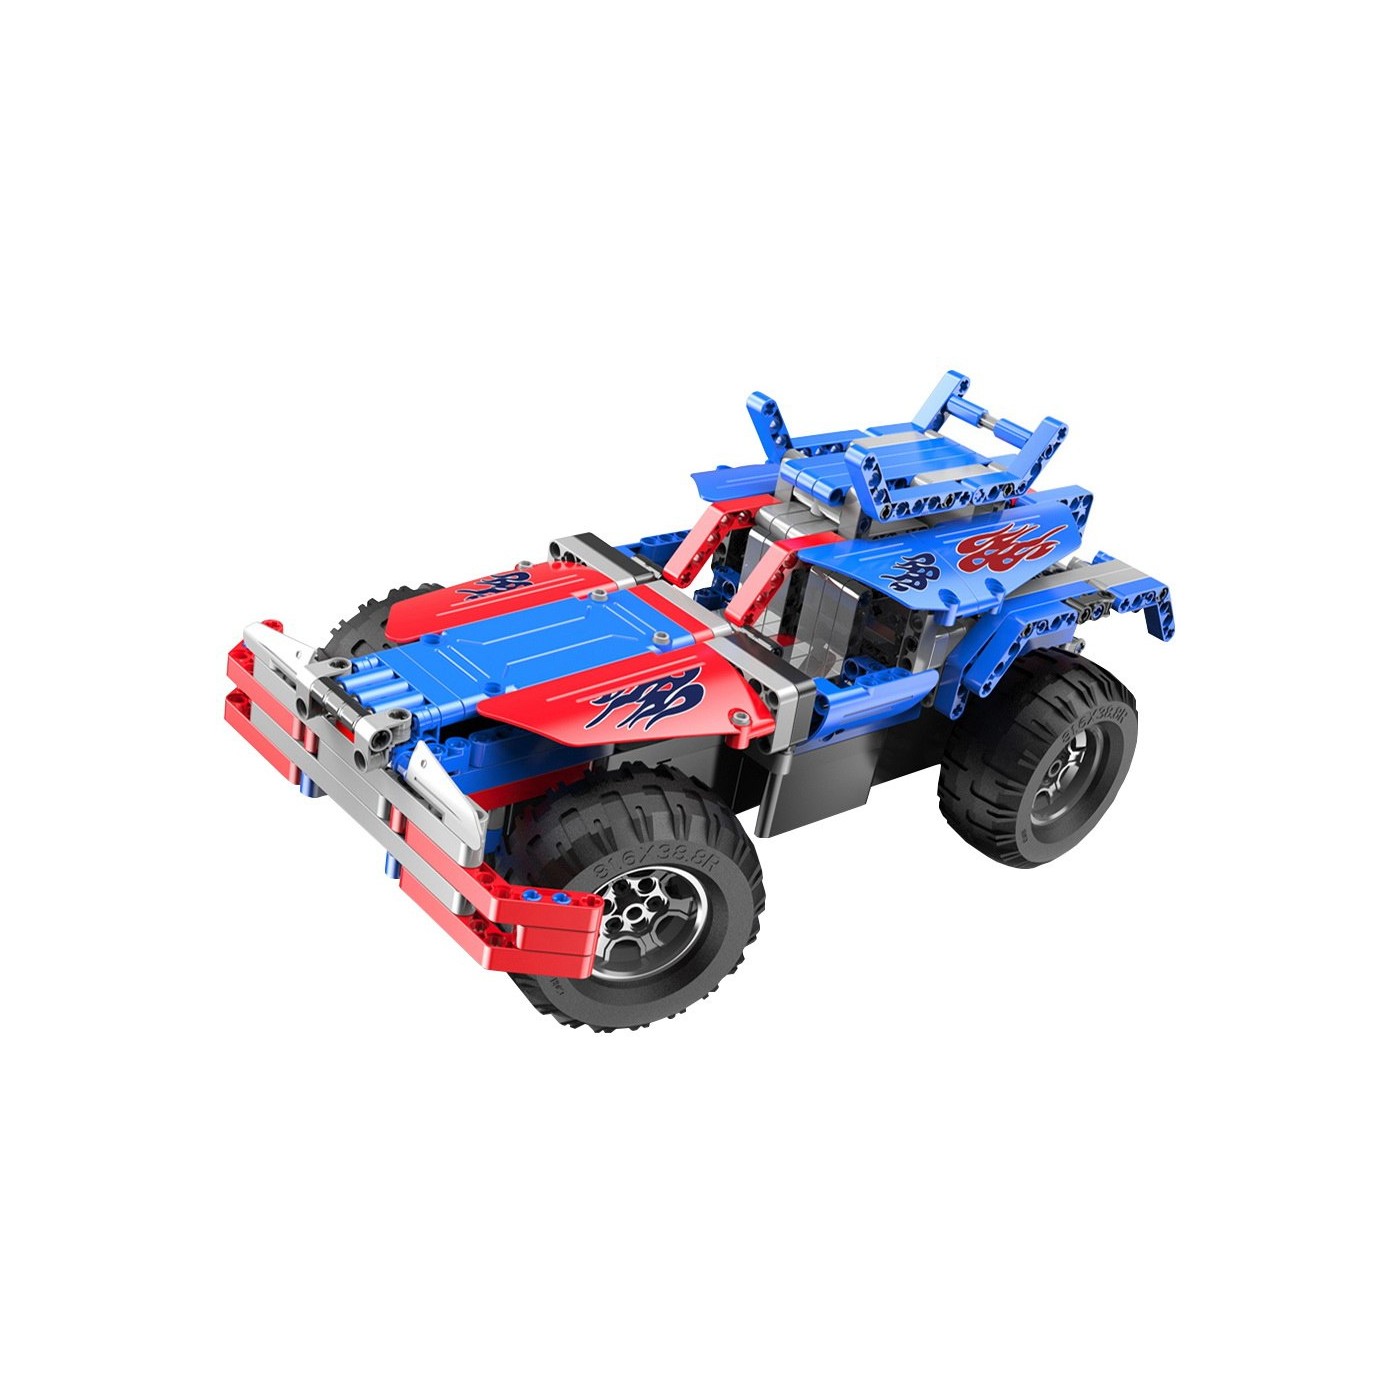 The Pads R/C Car Truck Red EE